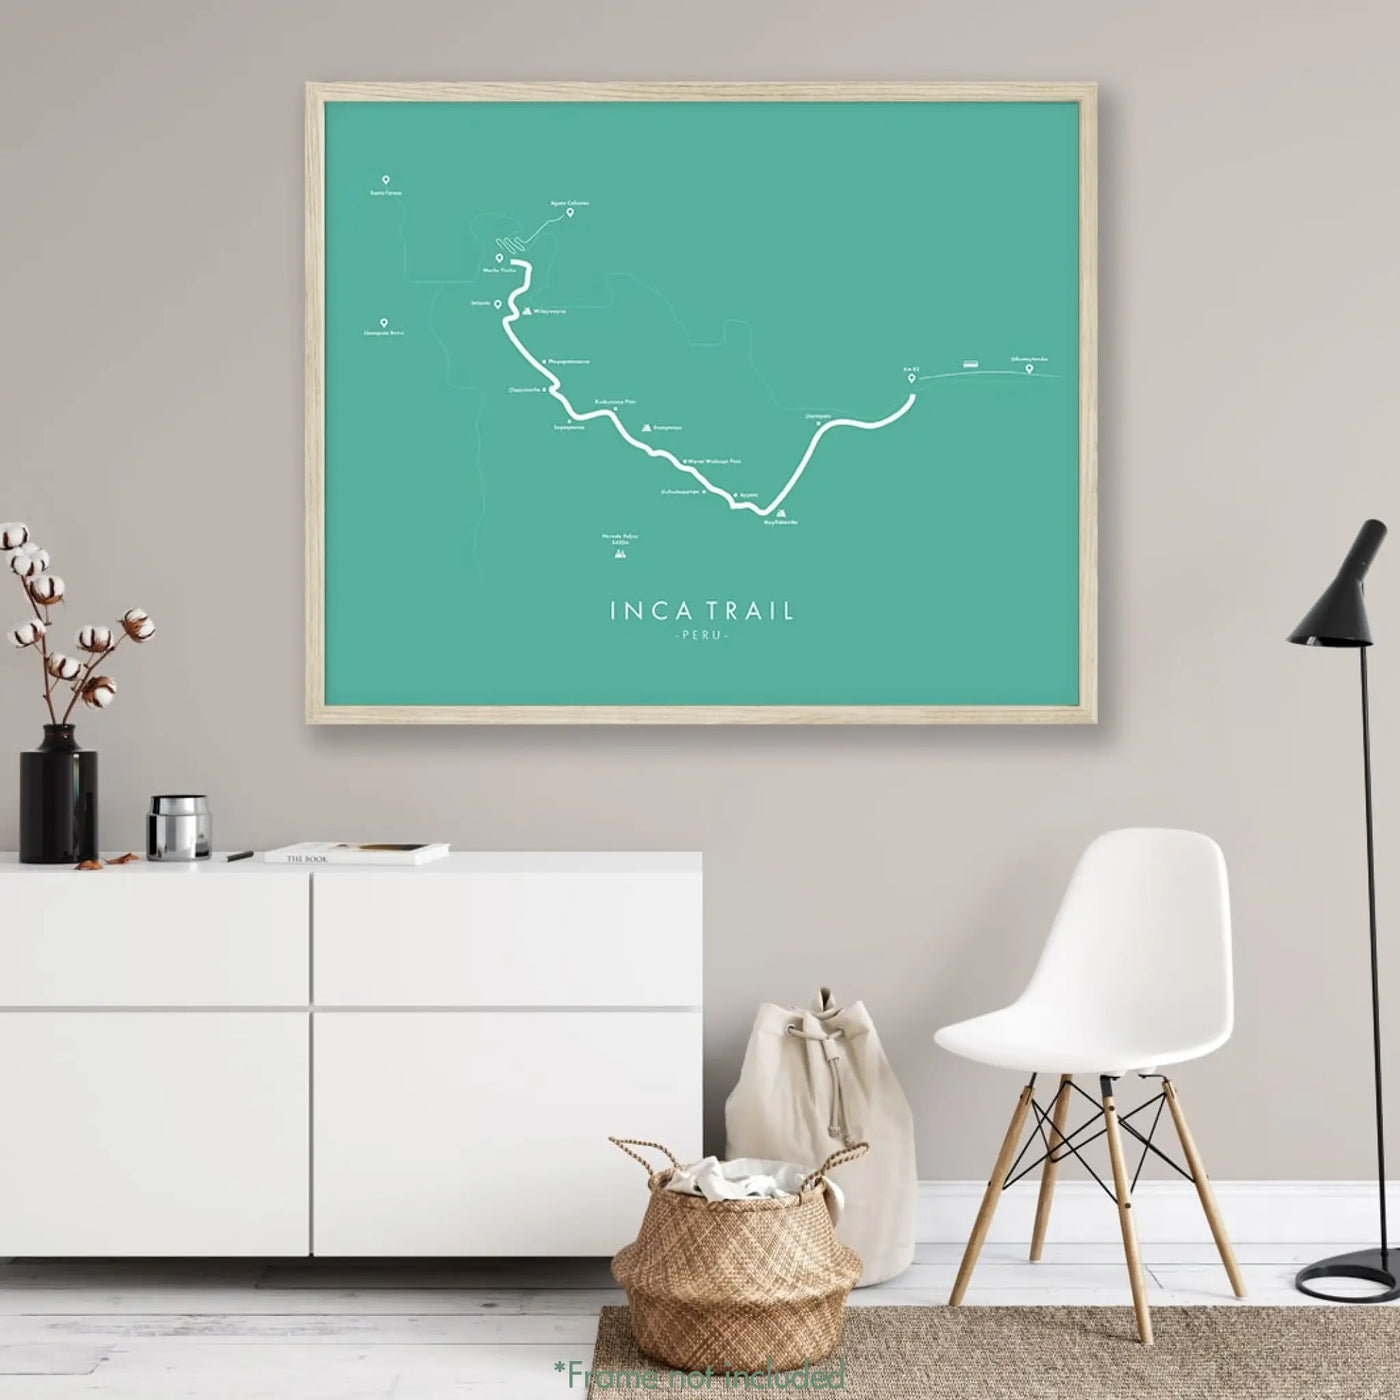 Trail Poster of Inca Trail - Teal Mockup